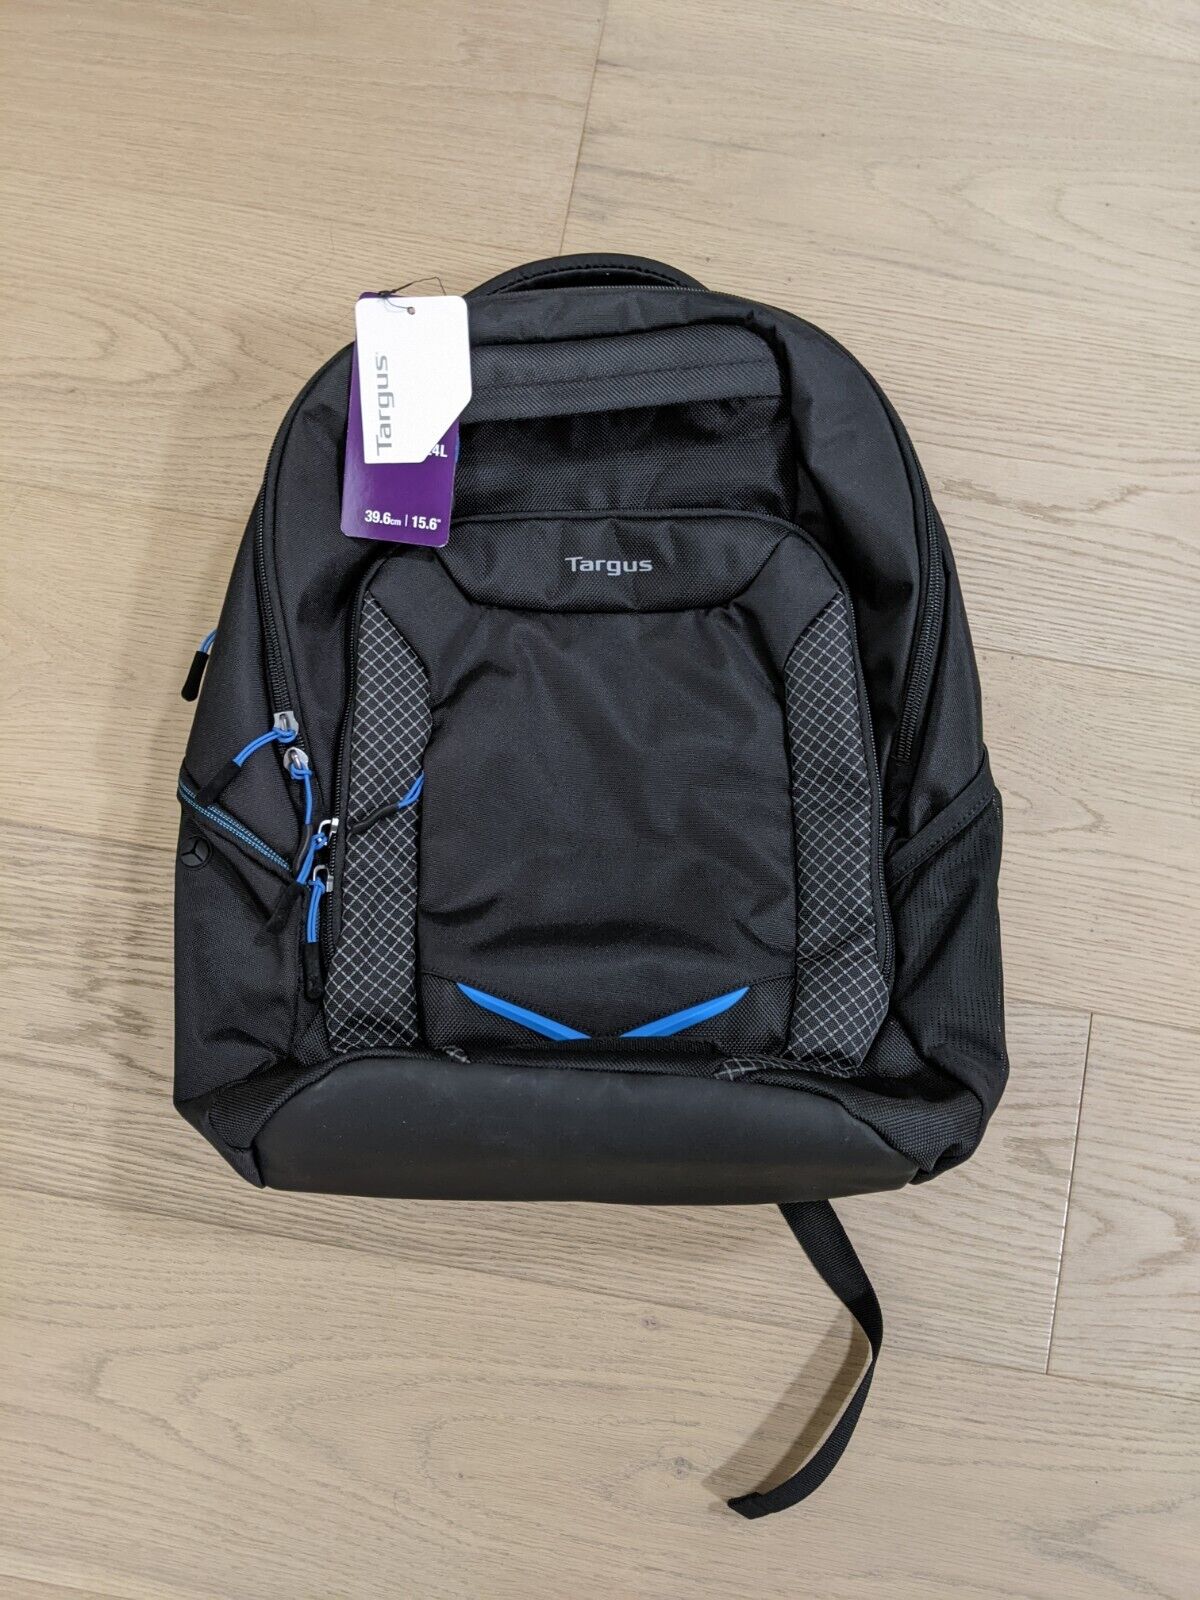 New Targus Active Commuter Backpack 15.6 laptop